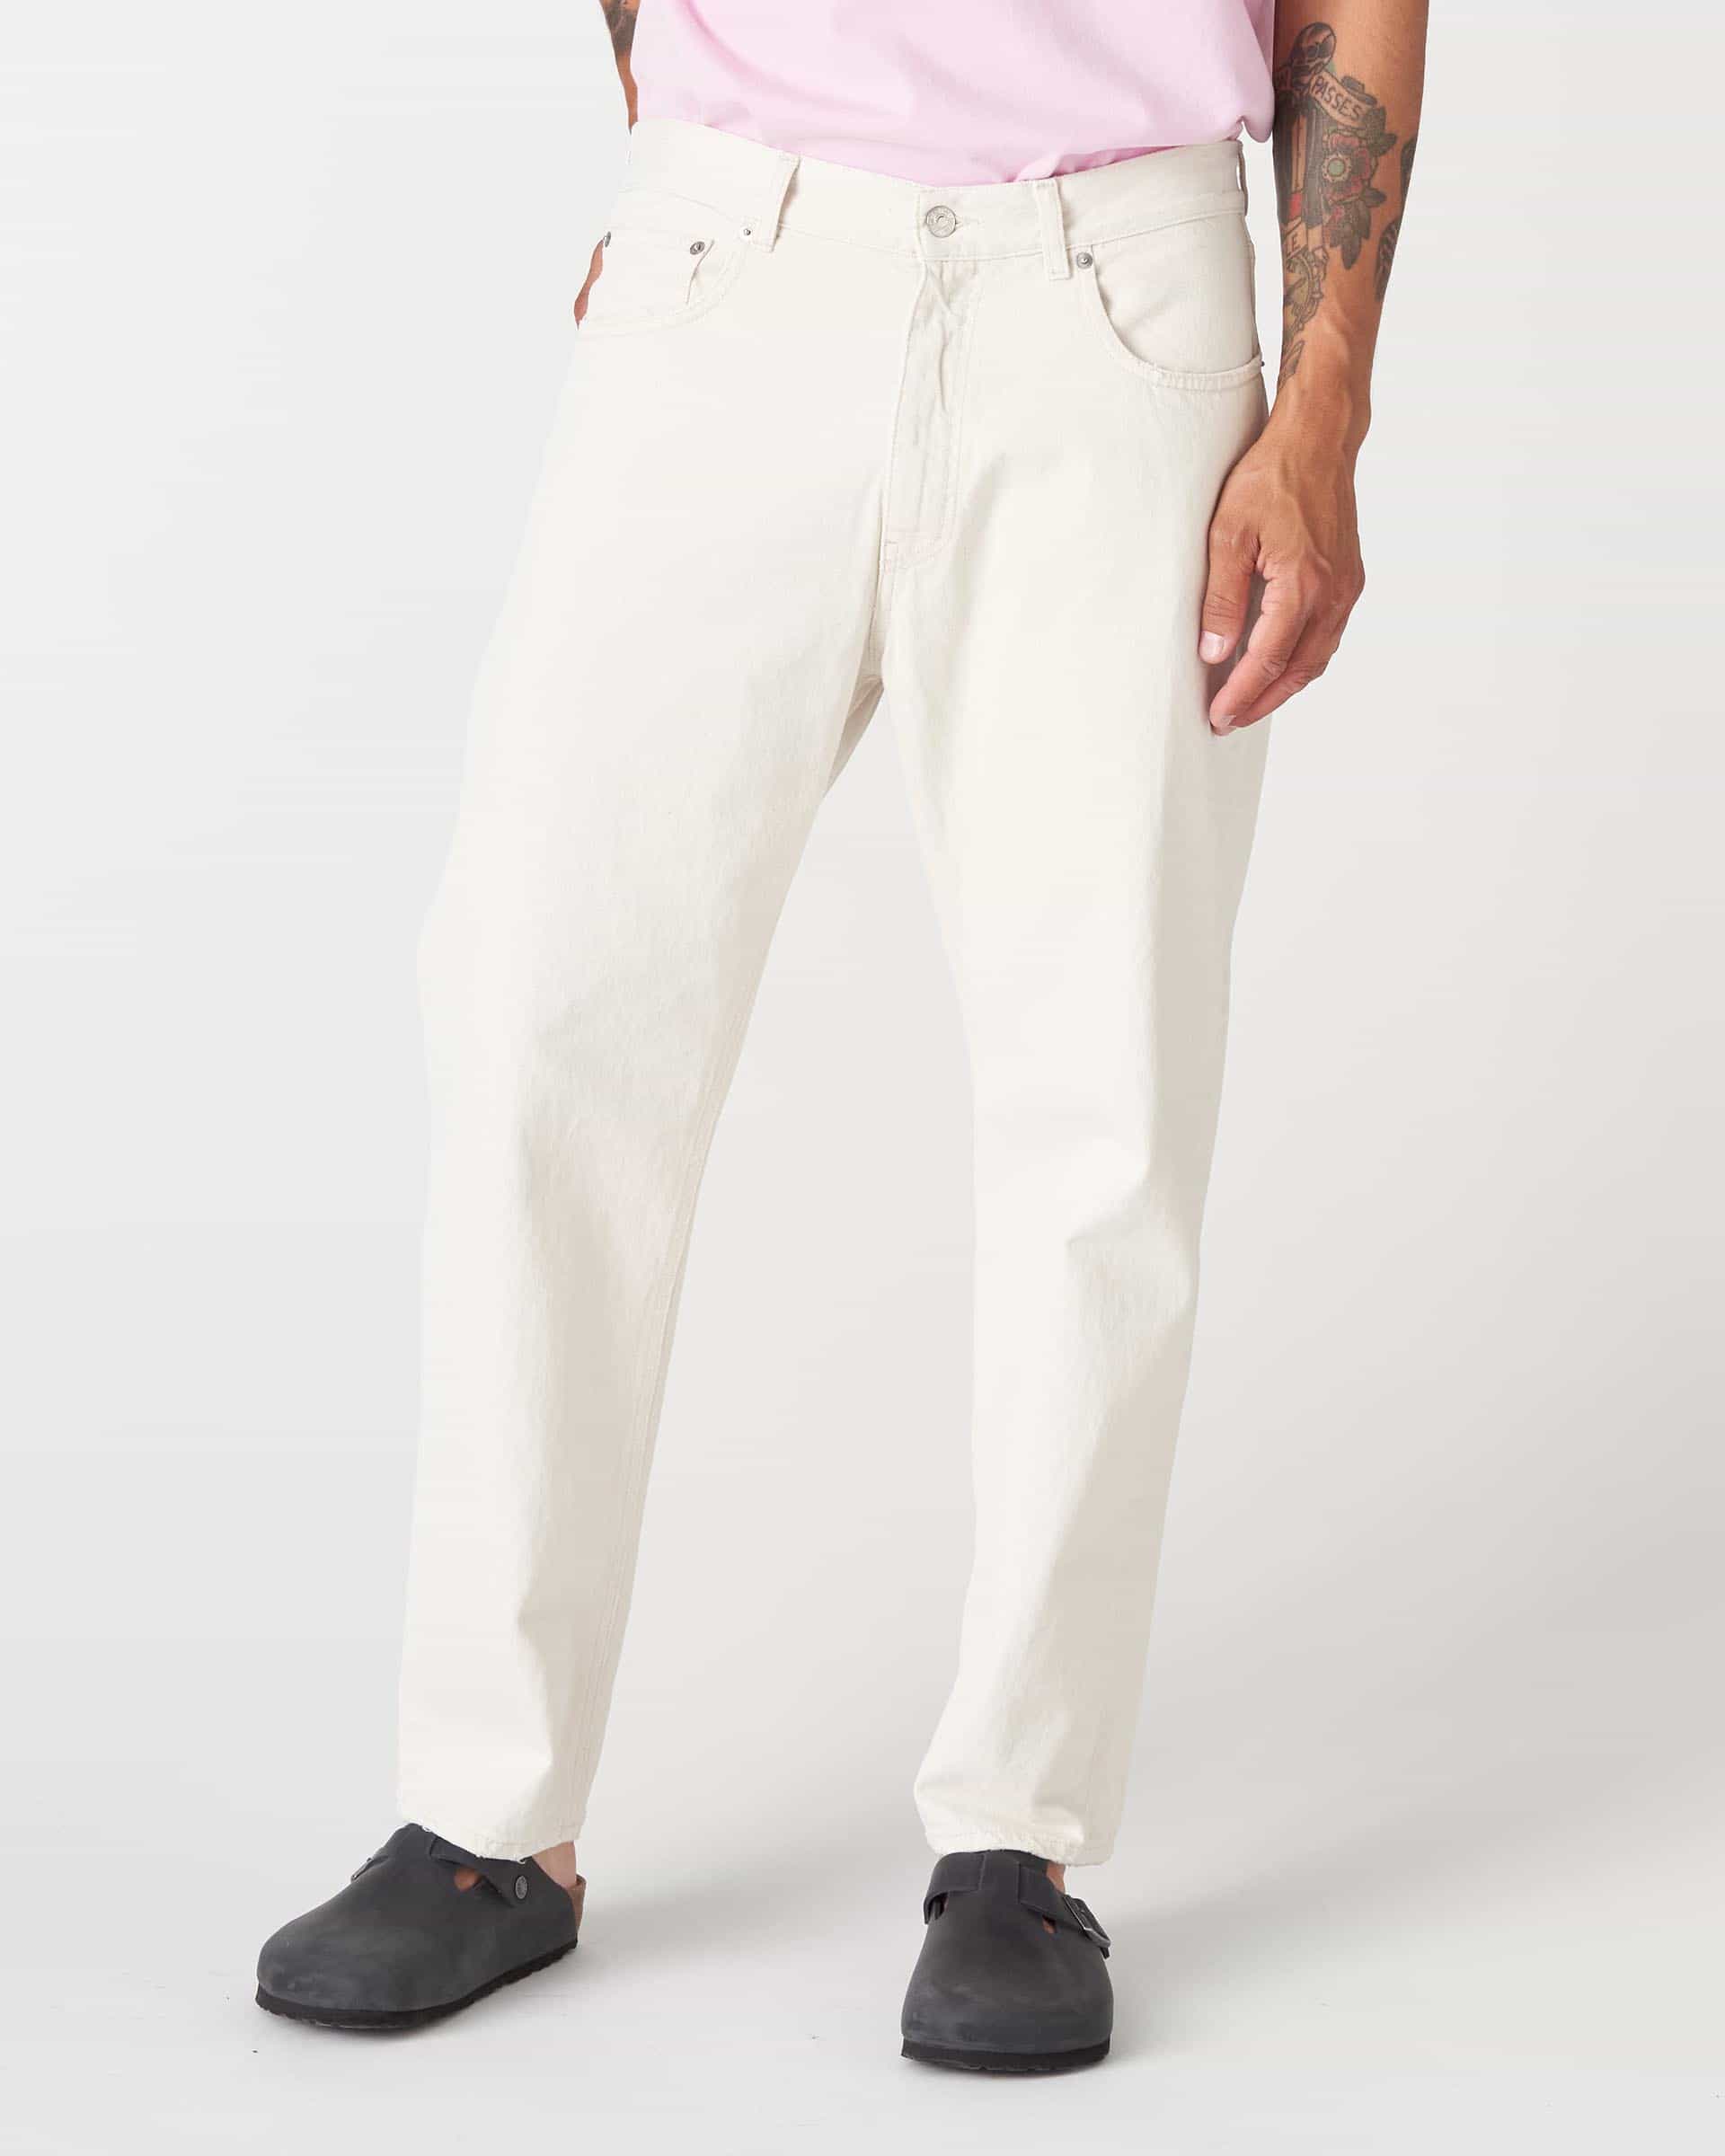 The Market Store | Arrow Trousers 5 Pockets With Selvedge